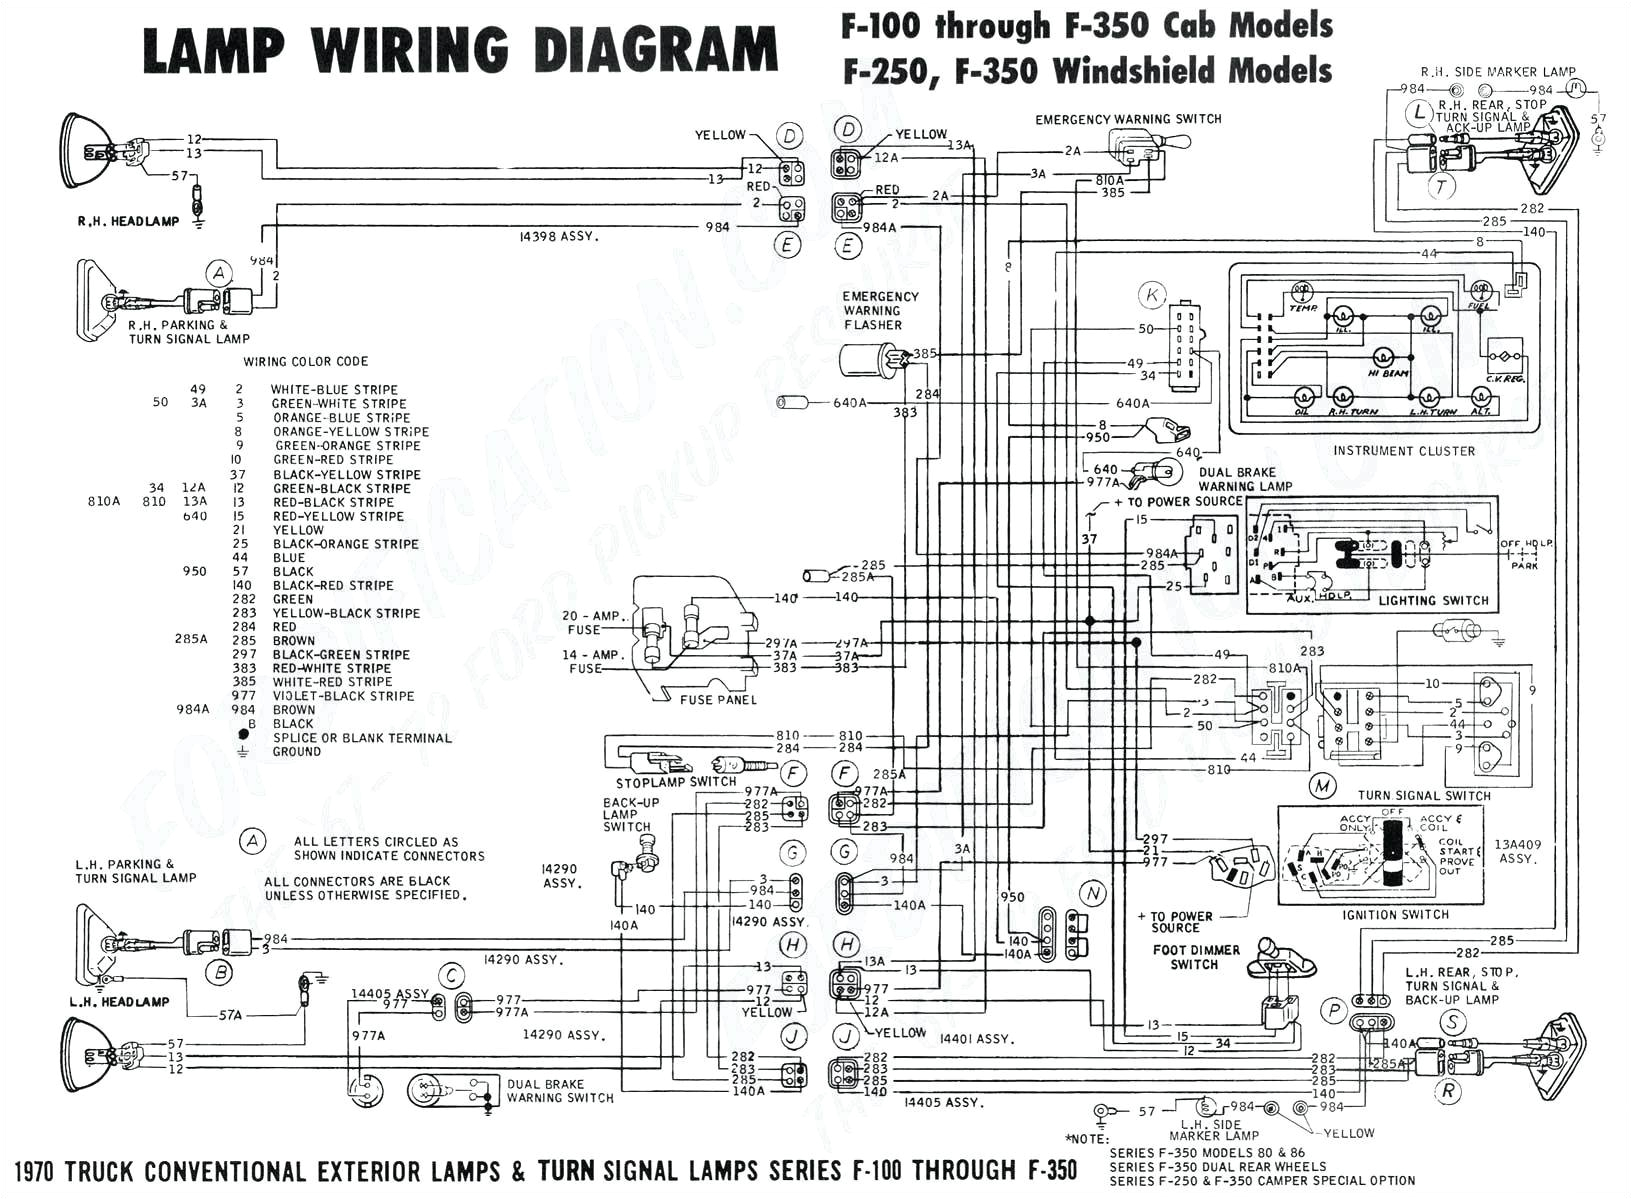 wiring a schematic in series wiring diagram toolbox 1988 harley softail ignition wiring diagram